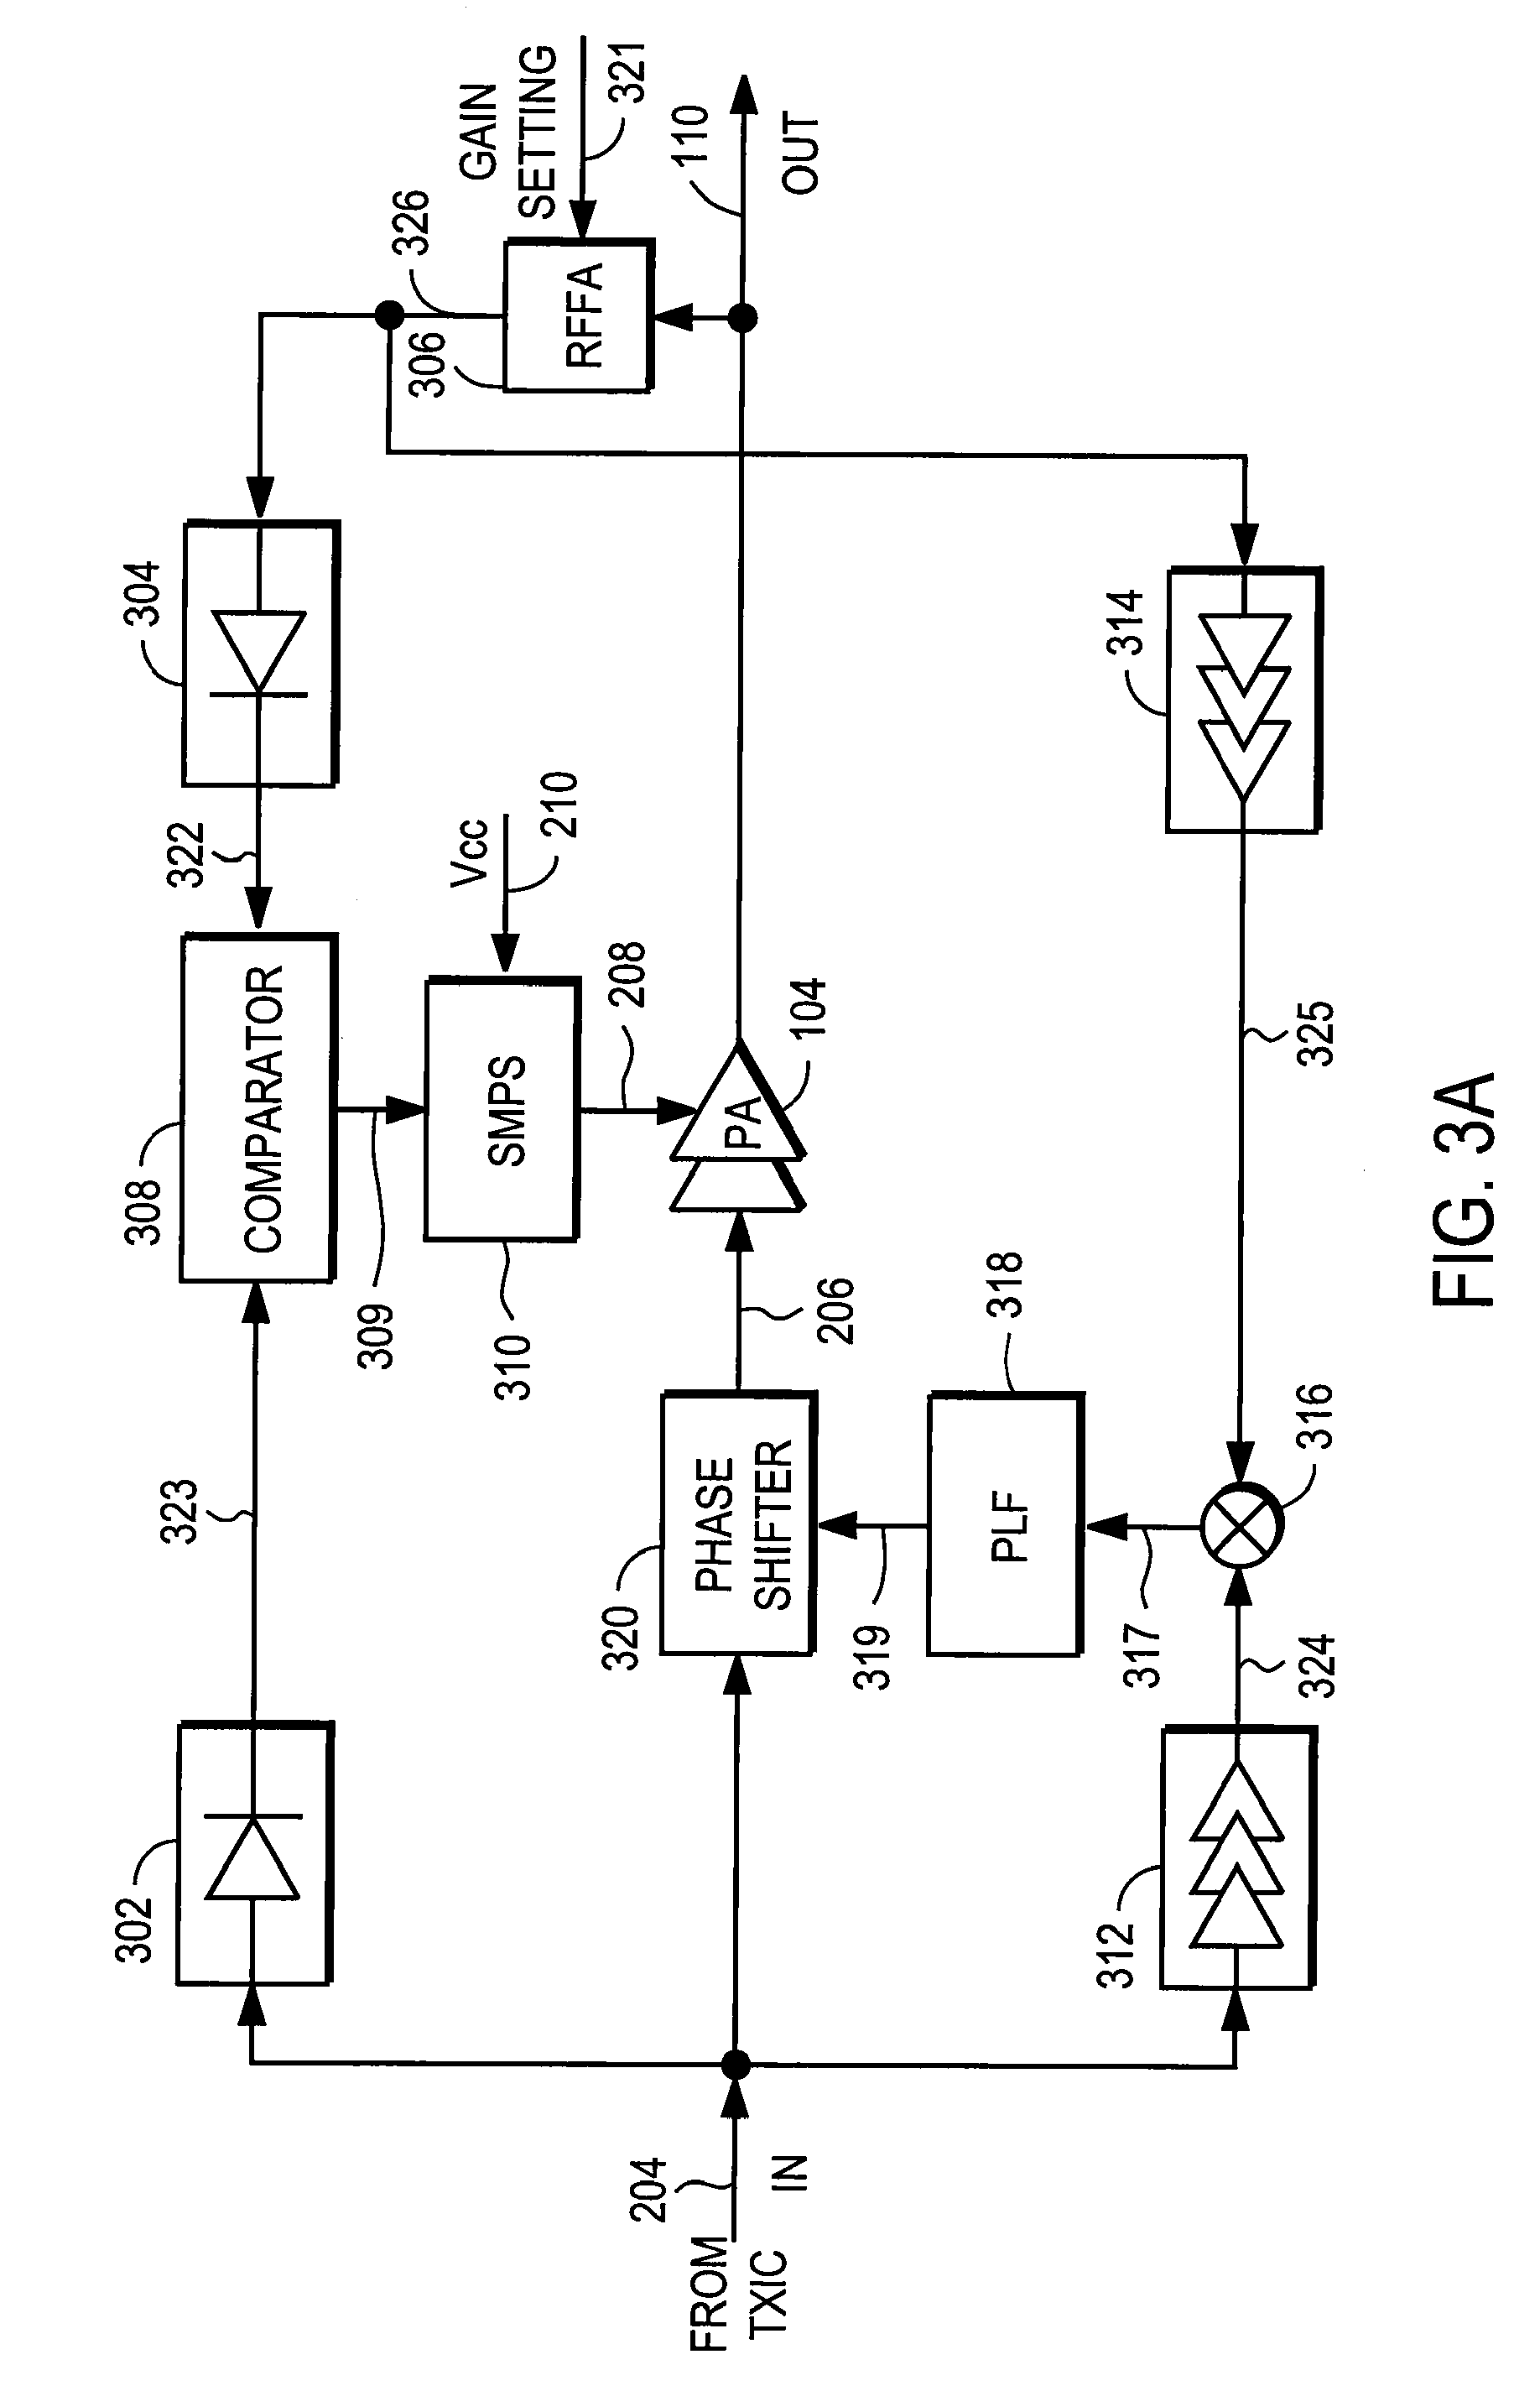 RF power amplifier controller circuit with compensation for output impedance mismatch